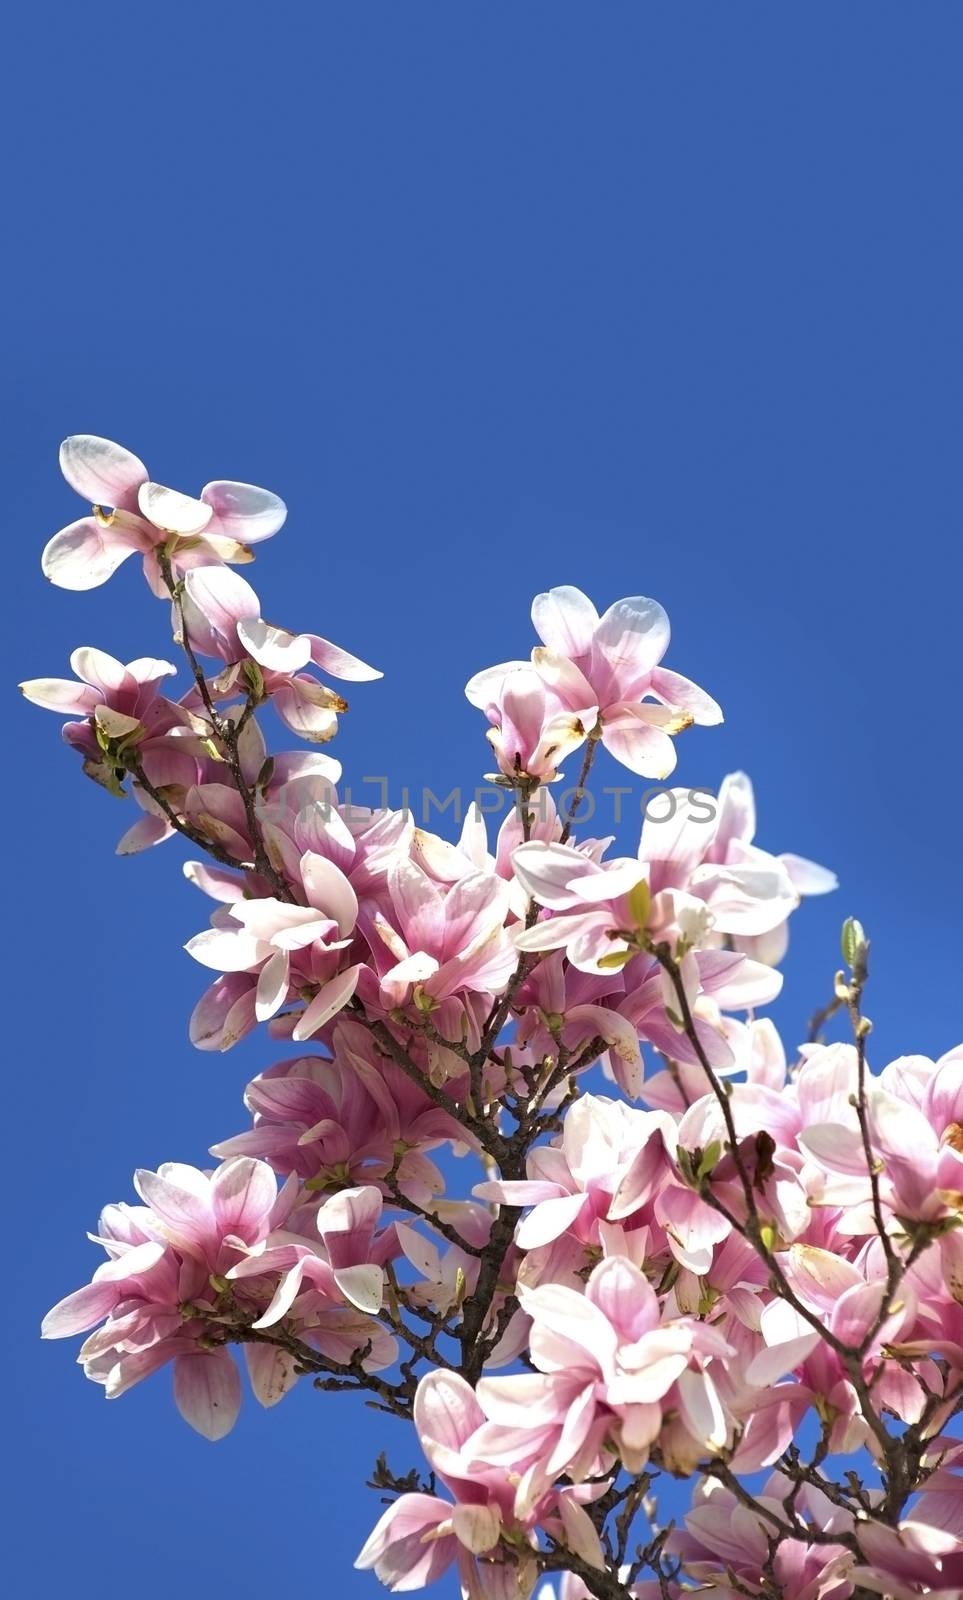 Flowering Magnolia Branches on Clear Blue Sky. Nature Photo Collection.